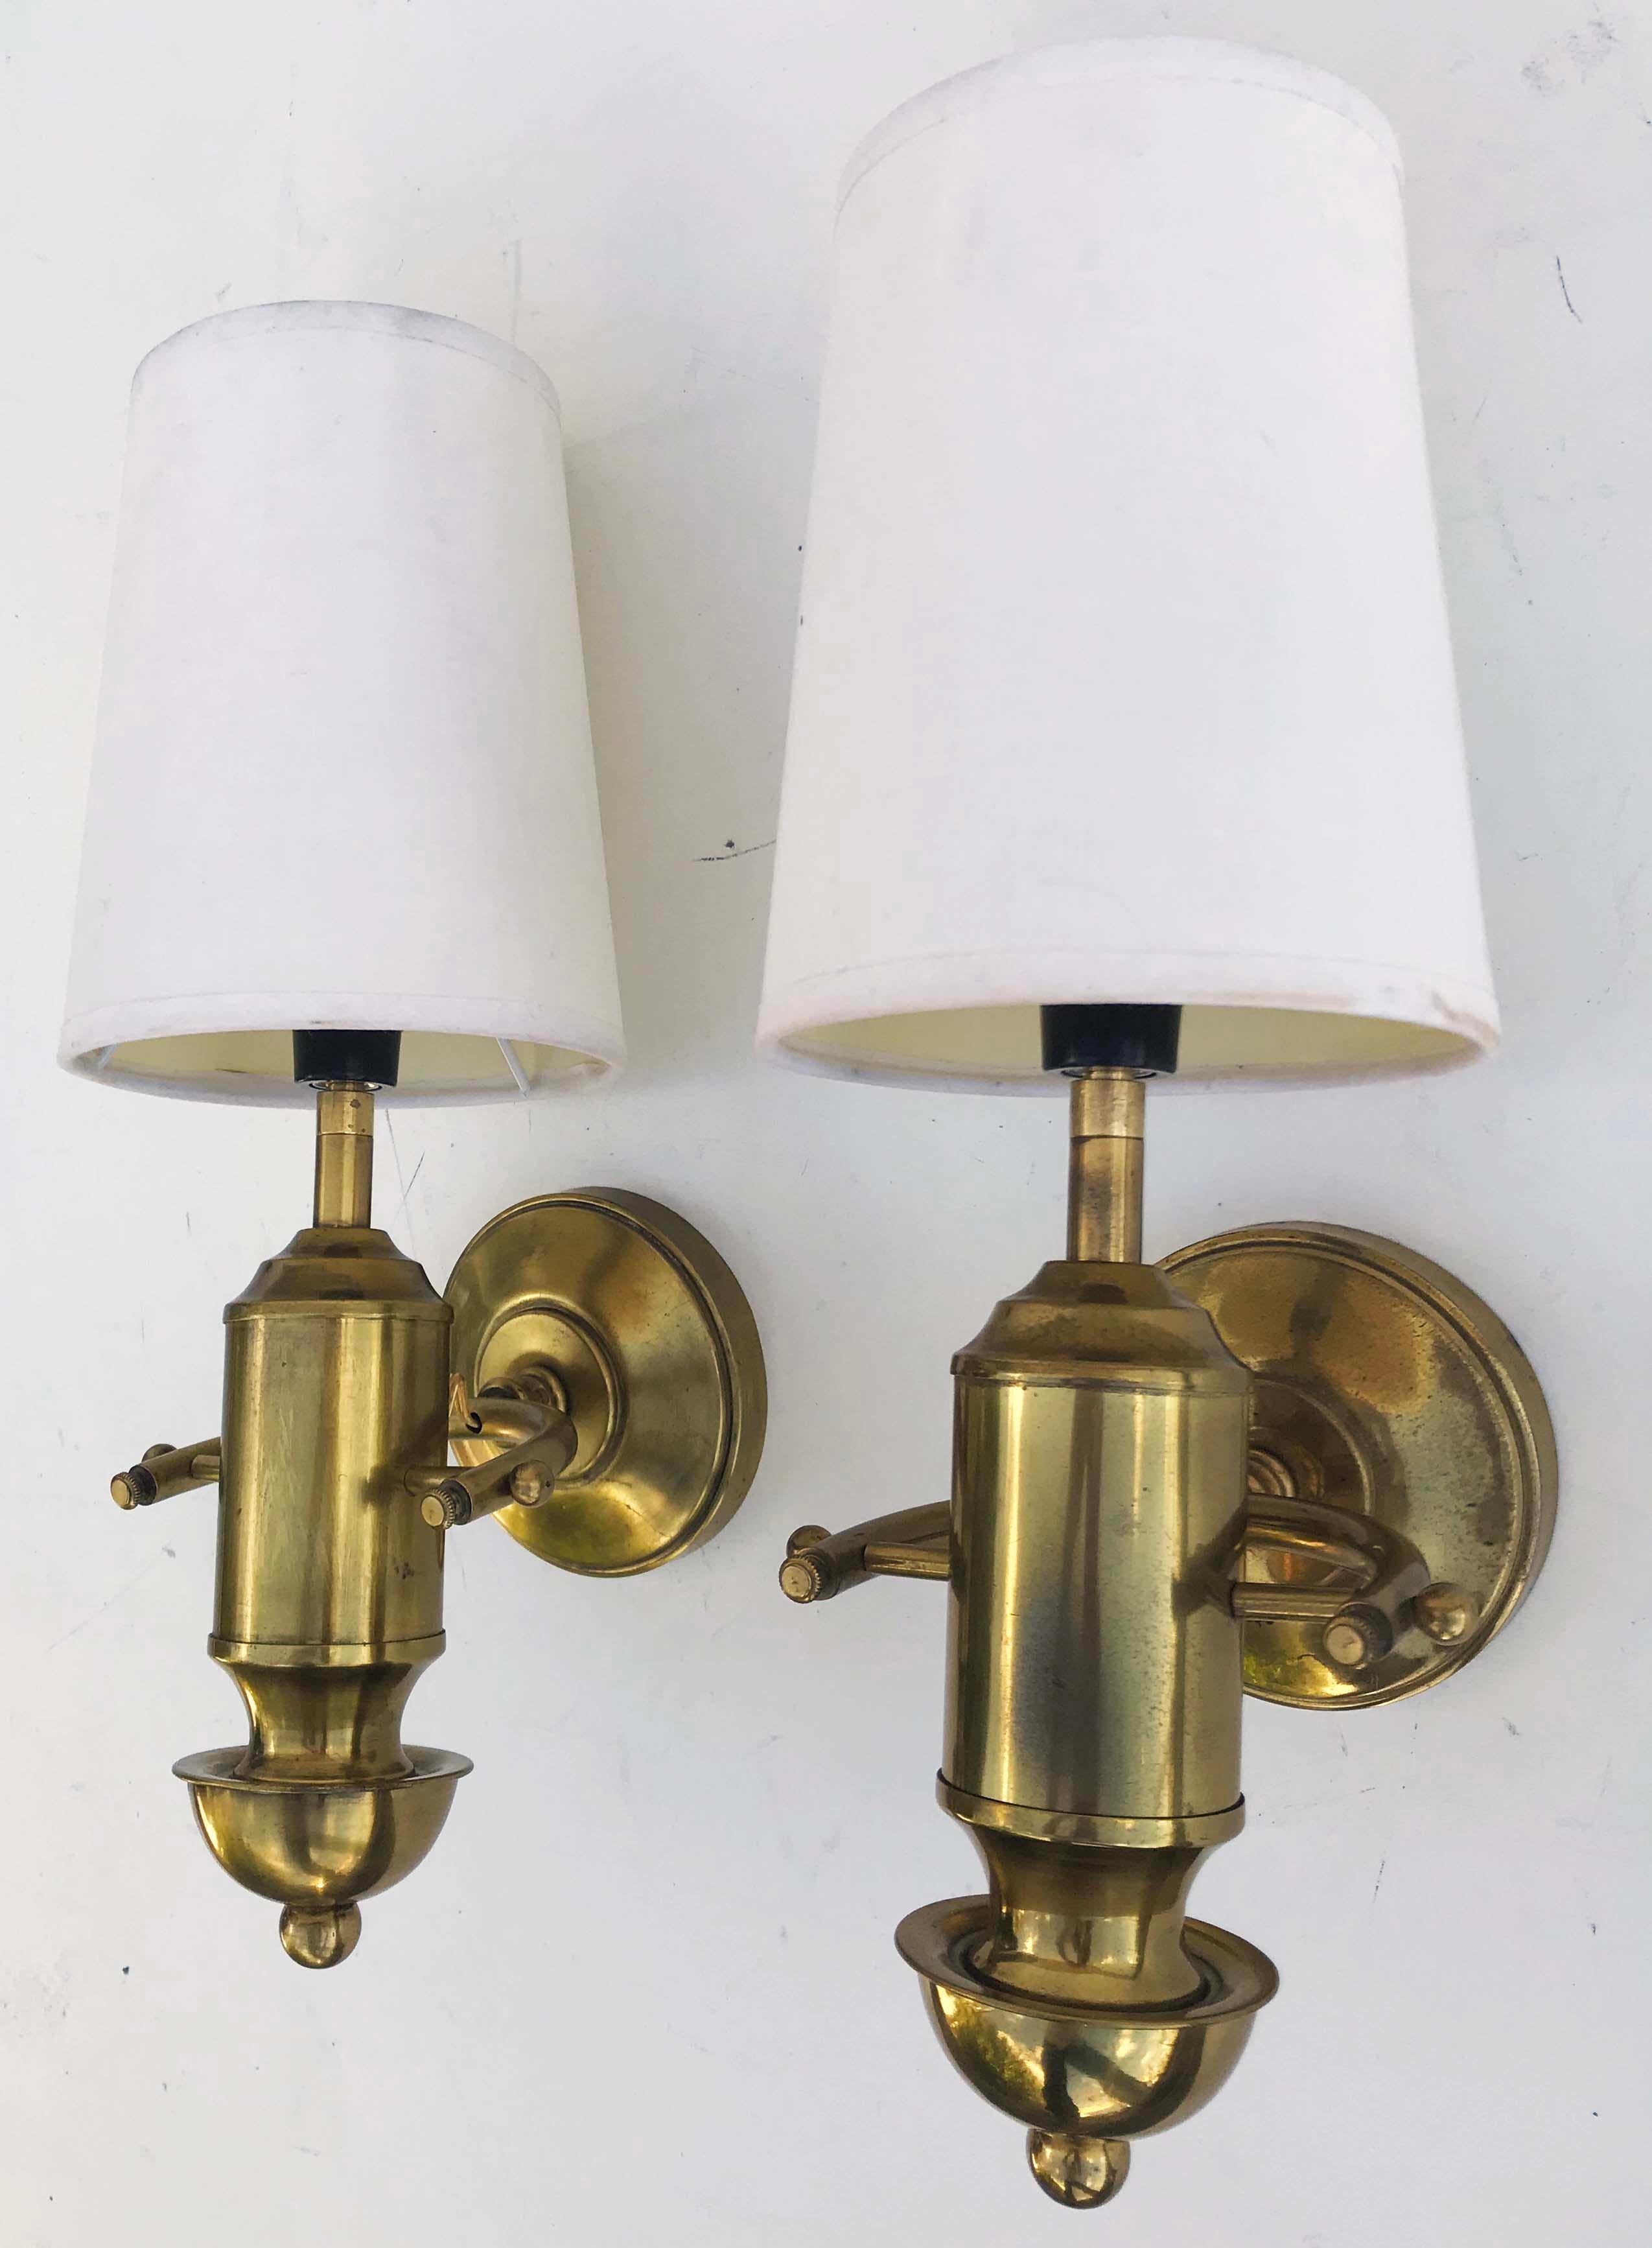 From a Saint tropez boat those brass sconces
1 light, 40 watts max bulb
US rewired and in working condition
Back plate: 4